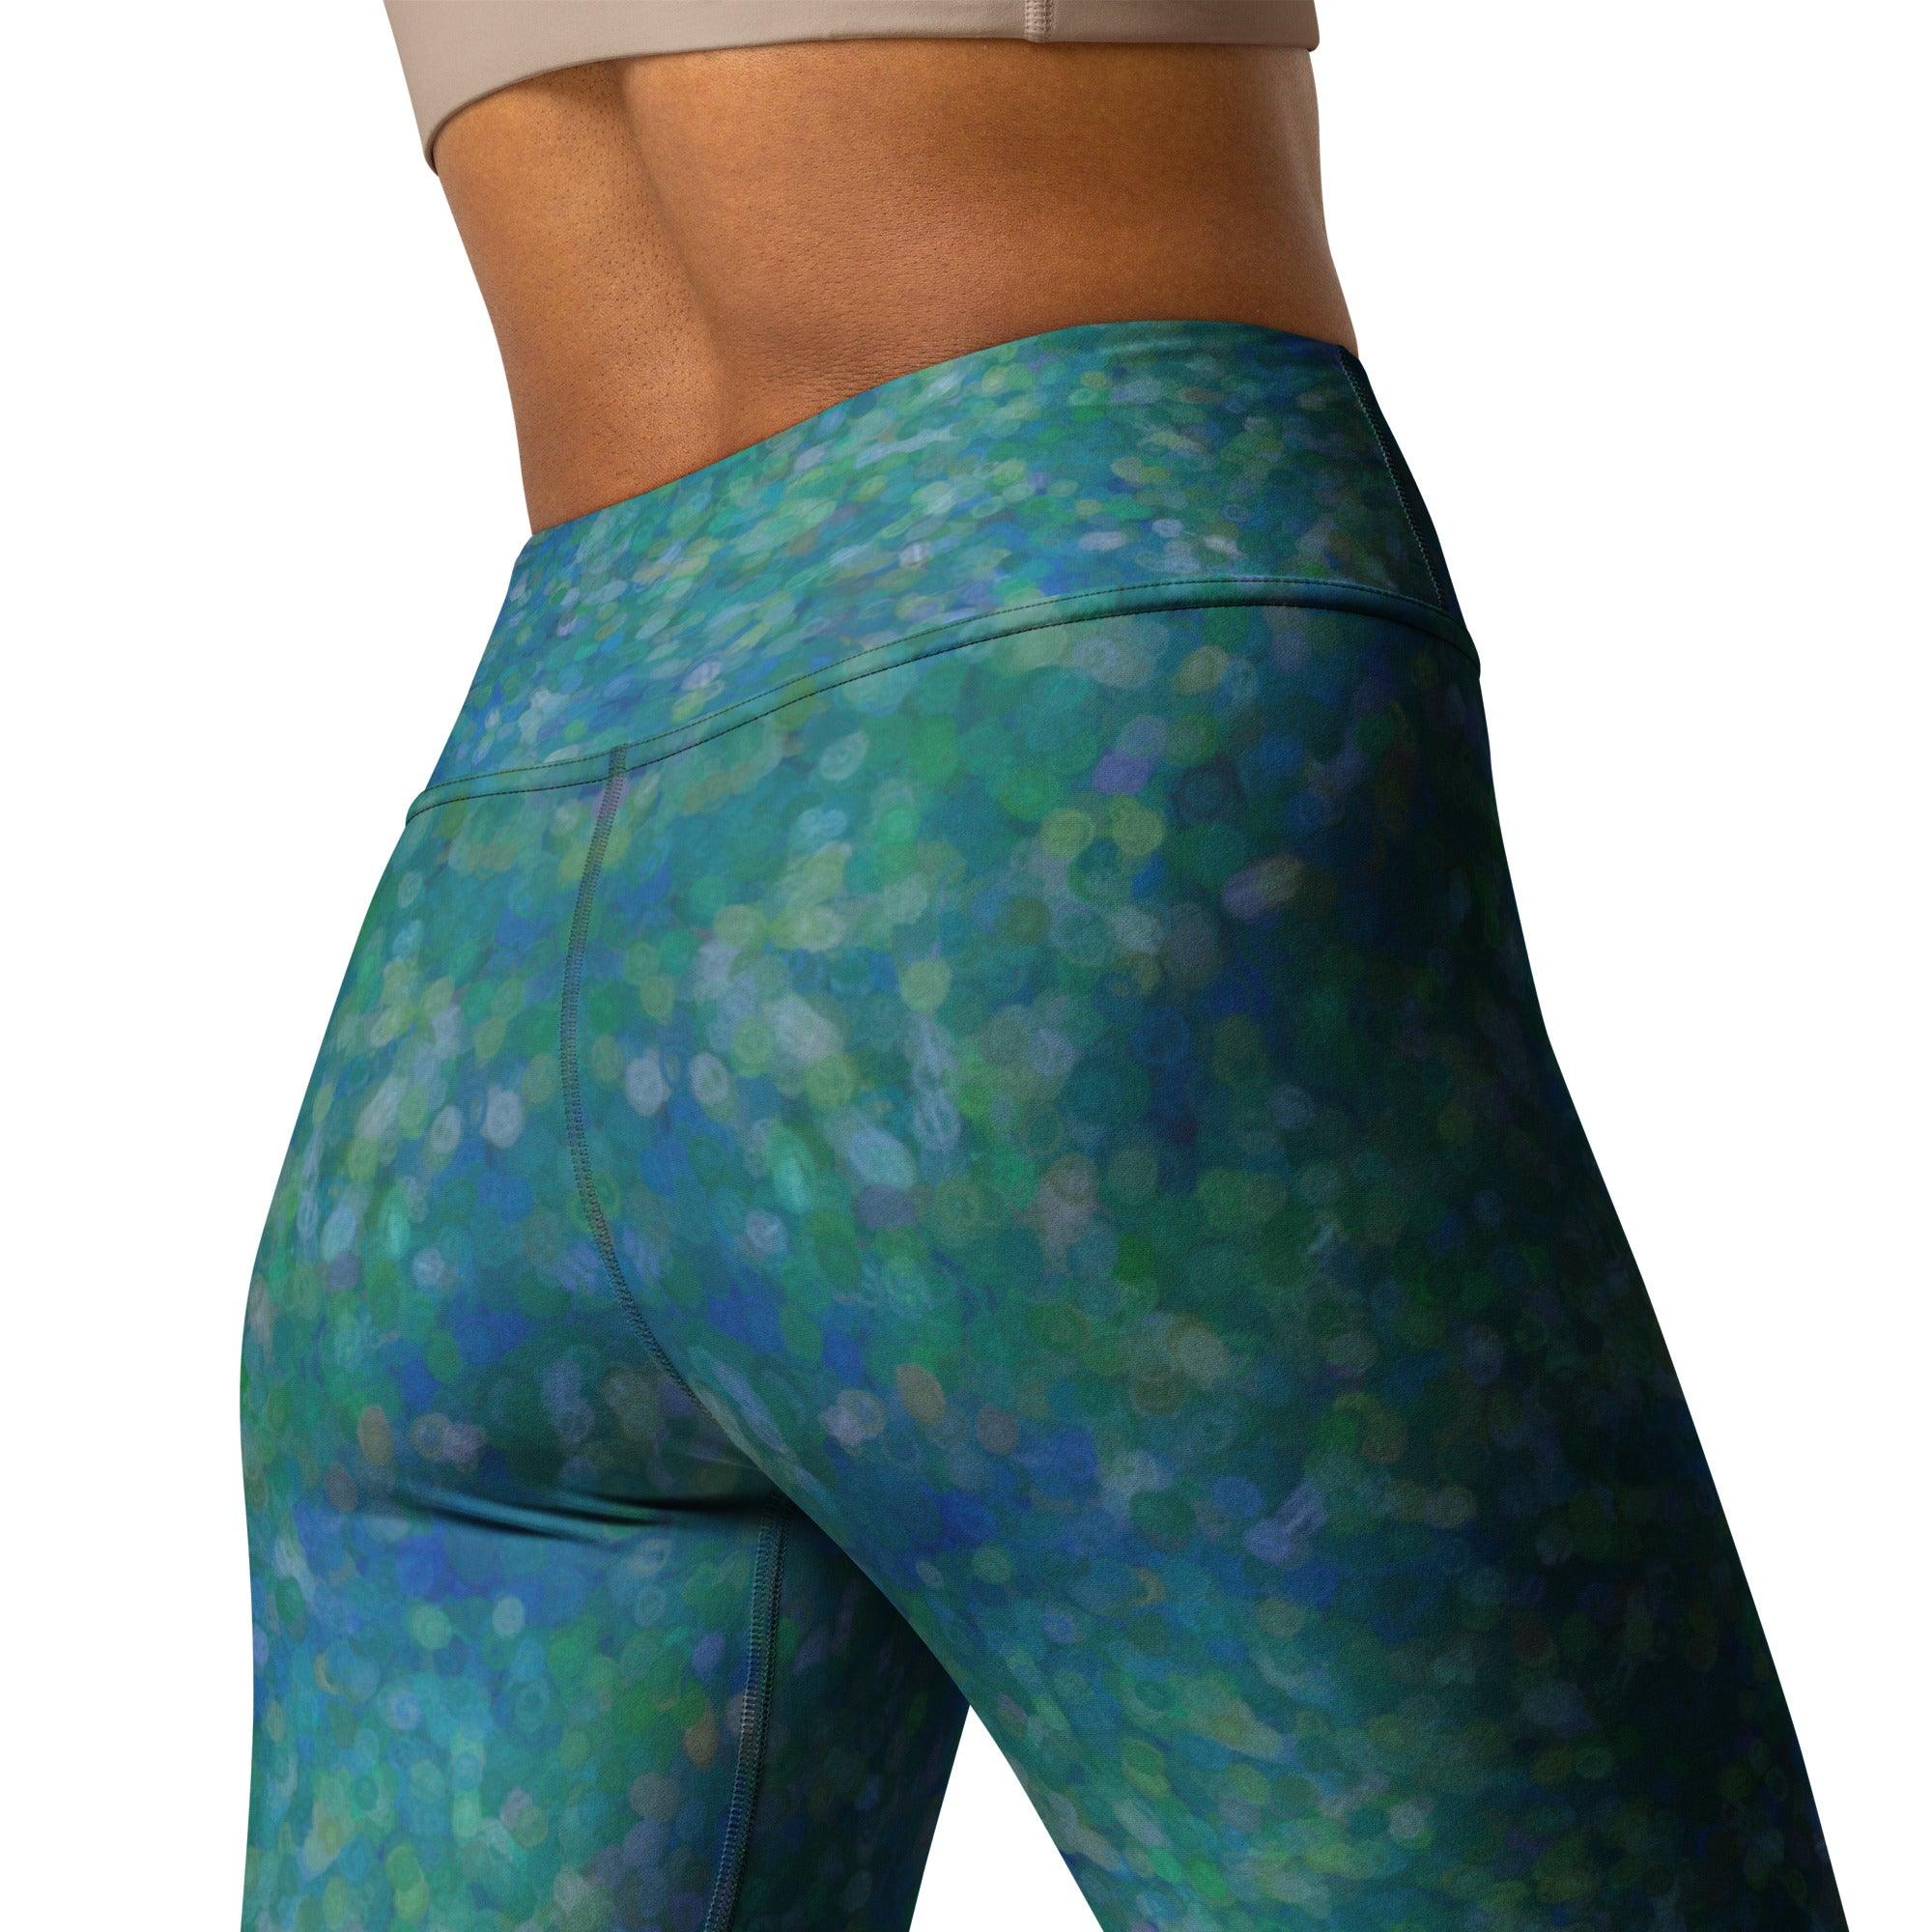 Glitter 11 Yoga Leggings paired with a yoga mat in a studio setting.